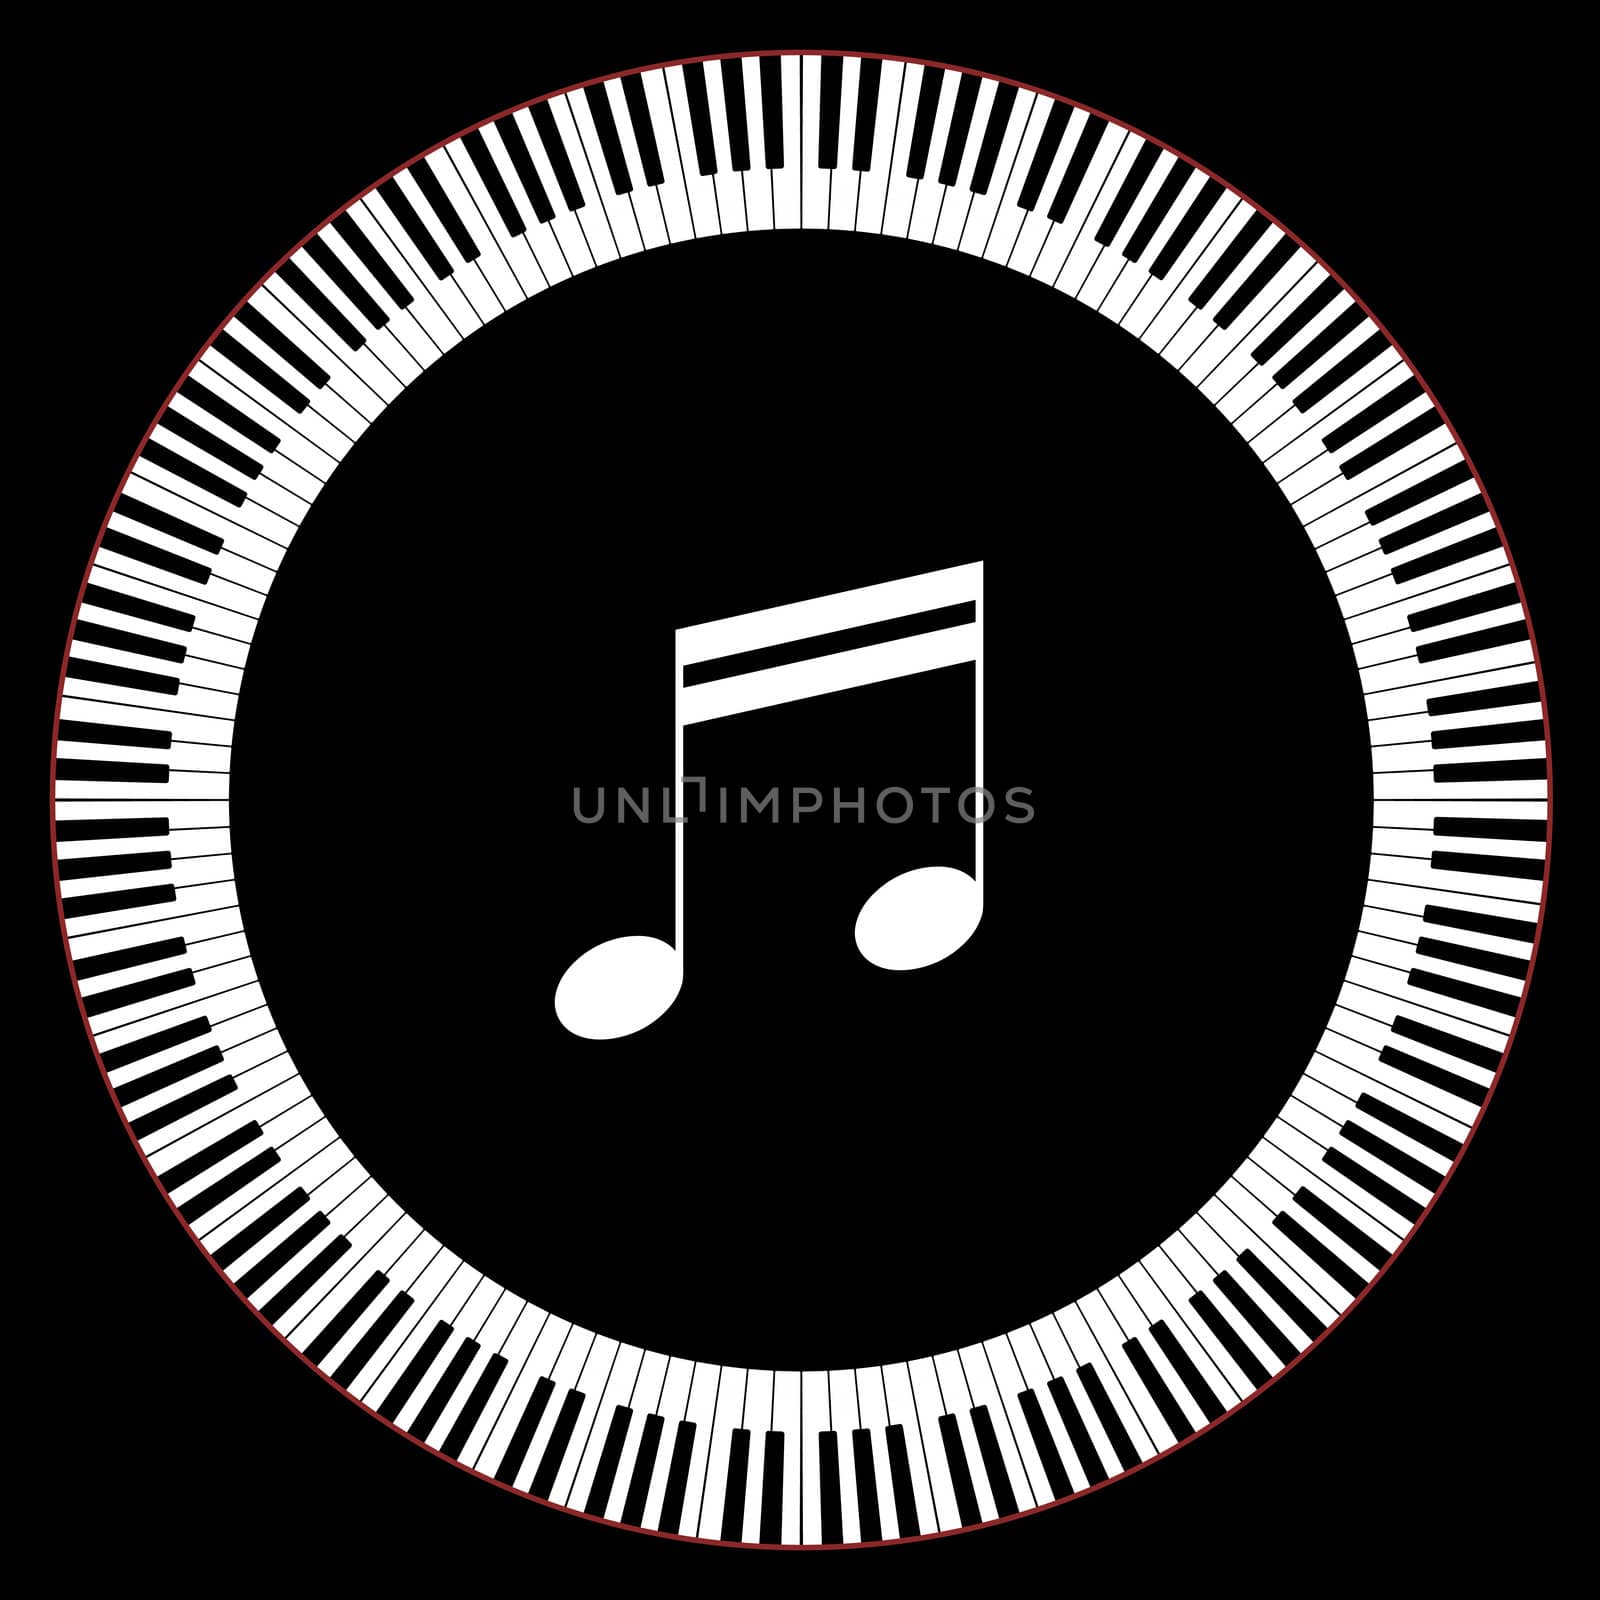 Circle of Piano Keys by bmelo